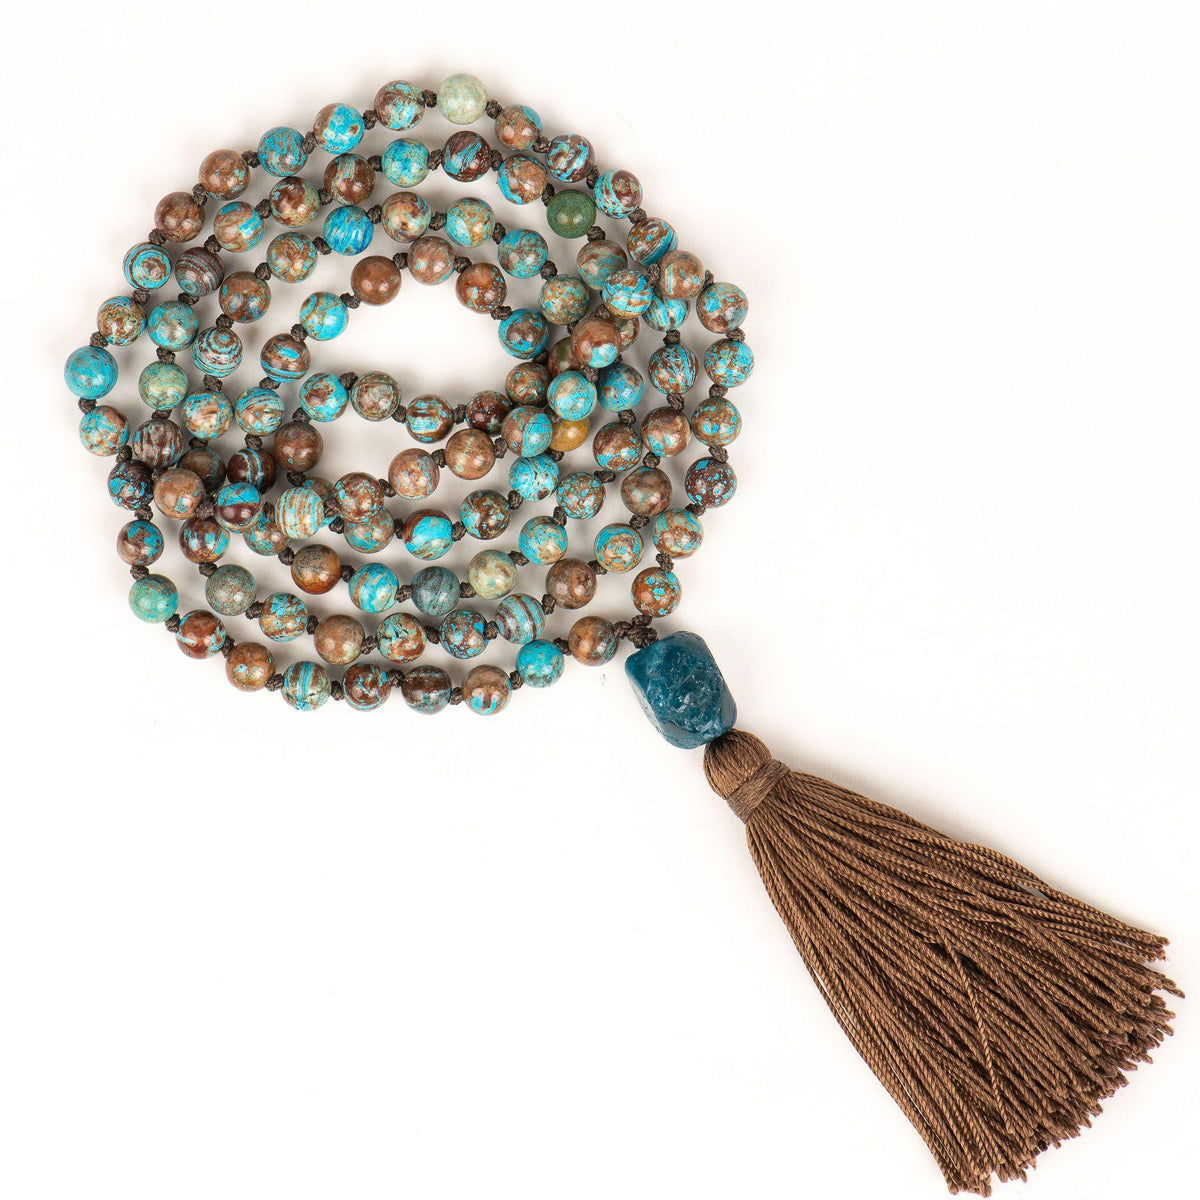 Blue and Brown Mala Beads for Being Present Meditation Necklace Merakalpa Malas